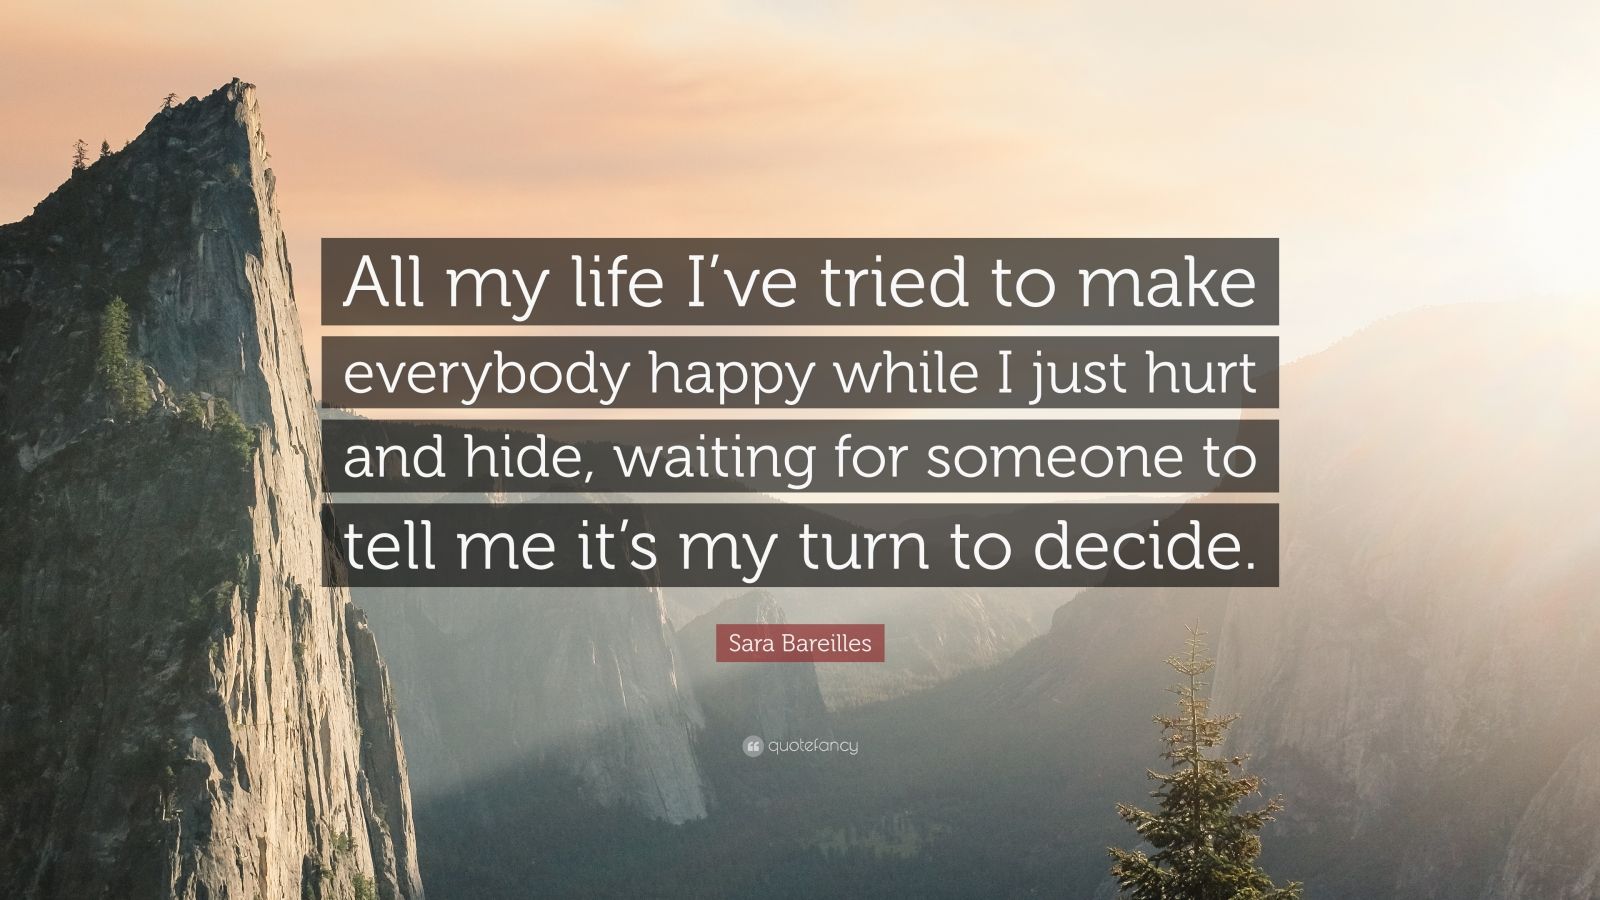 Sara Bareilles Quote: "All my life I've tried to make everybody happy while I just hurt and hide ...